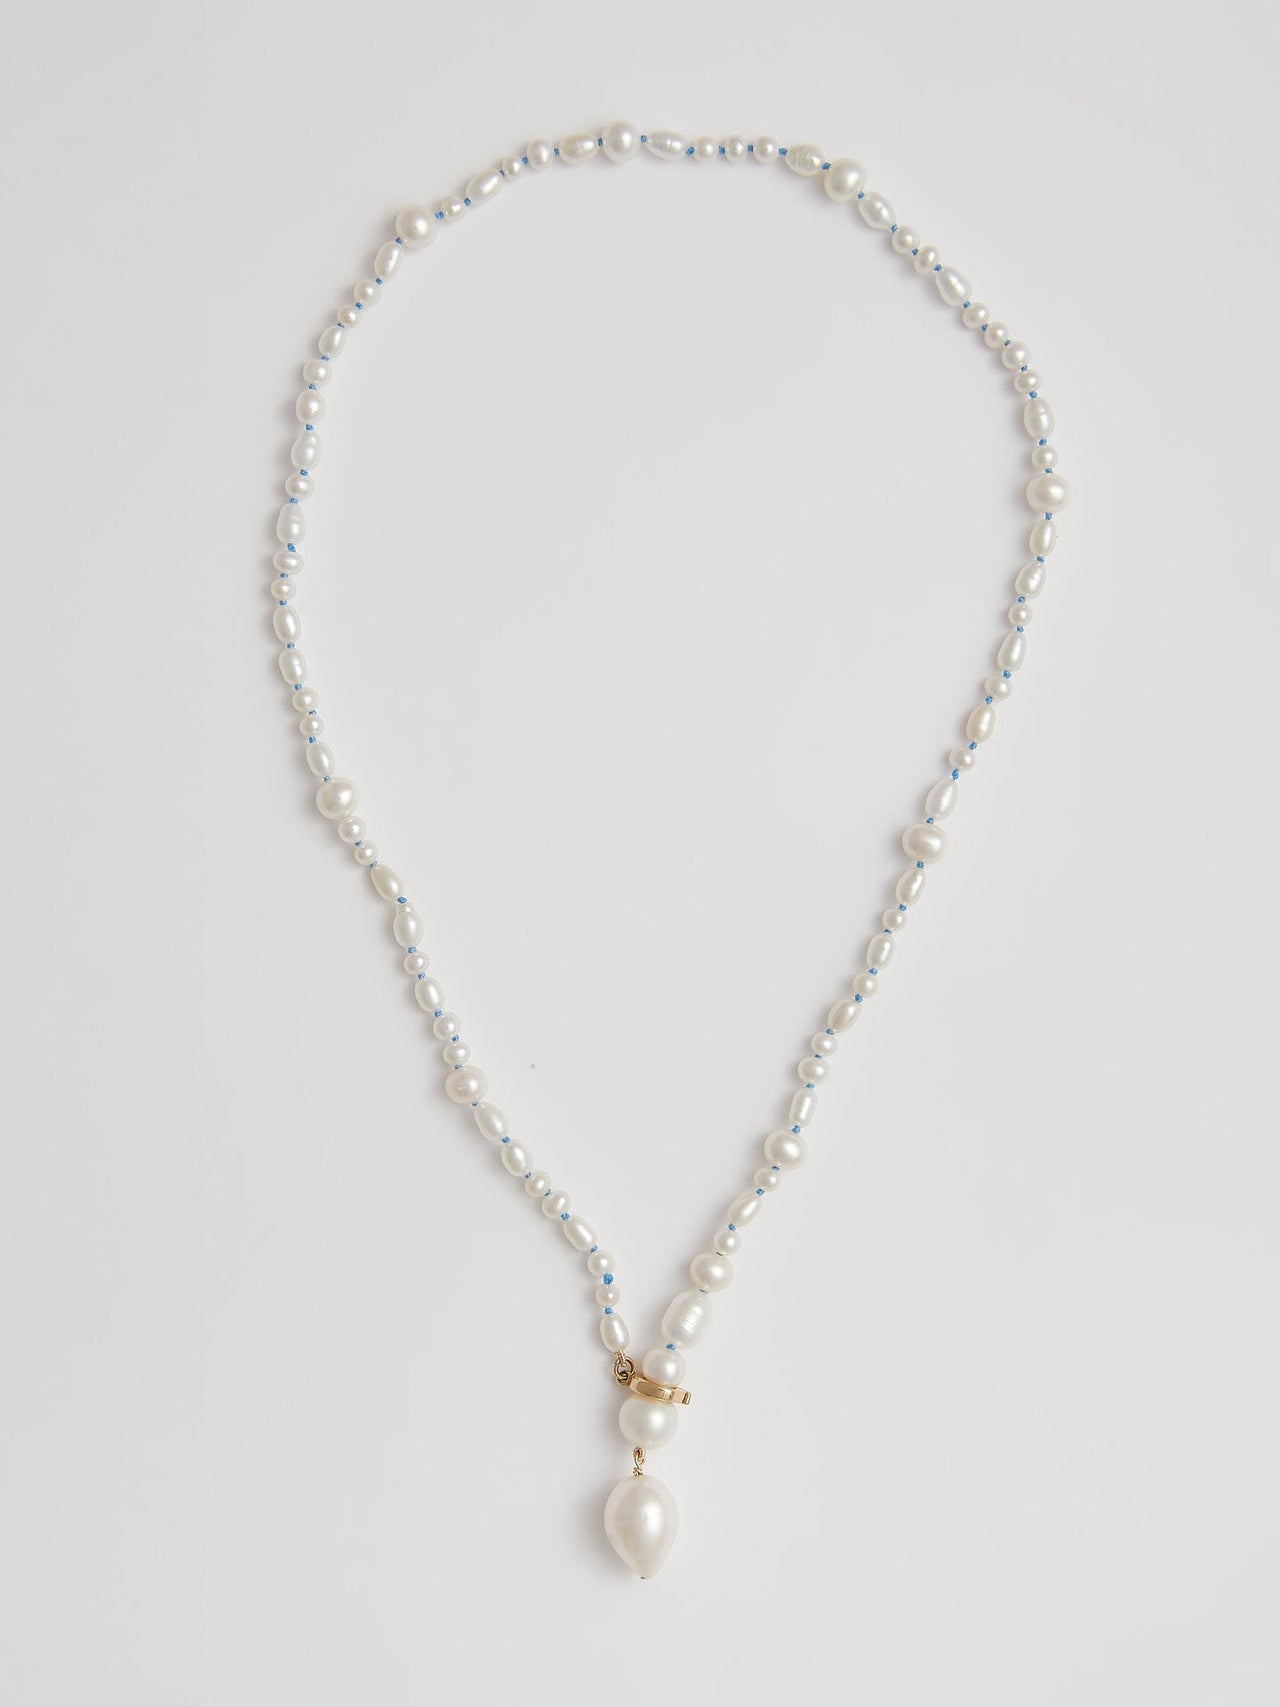 14kt Yellow Gold Pearl Necklace pictured on light grey background.